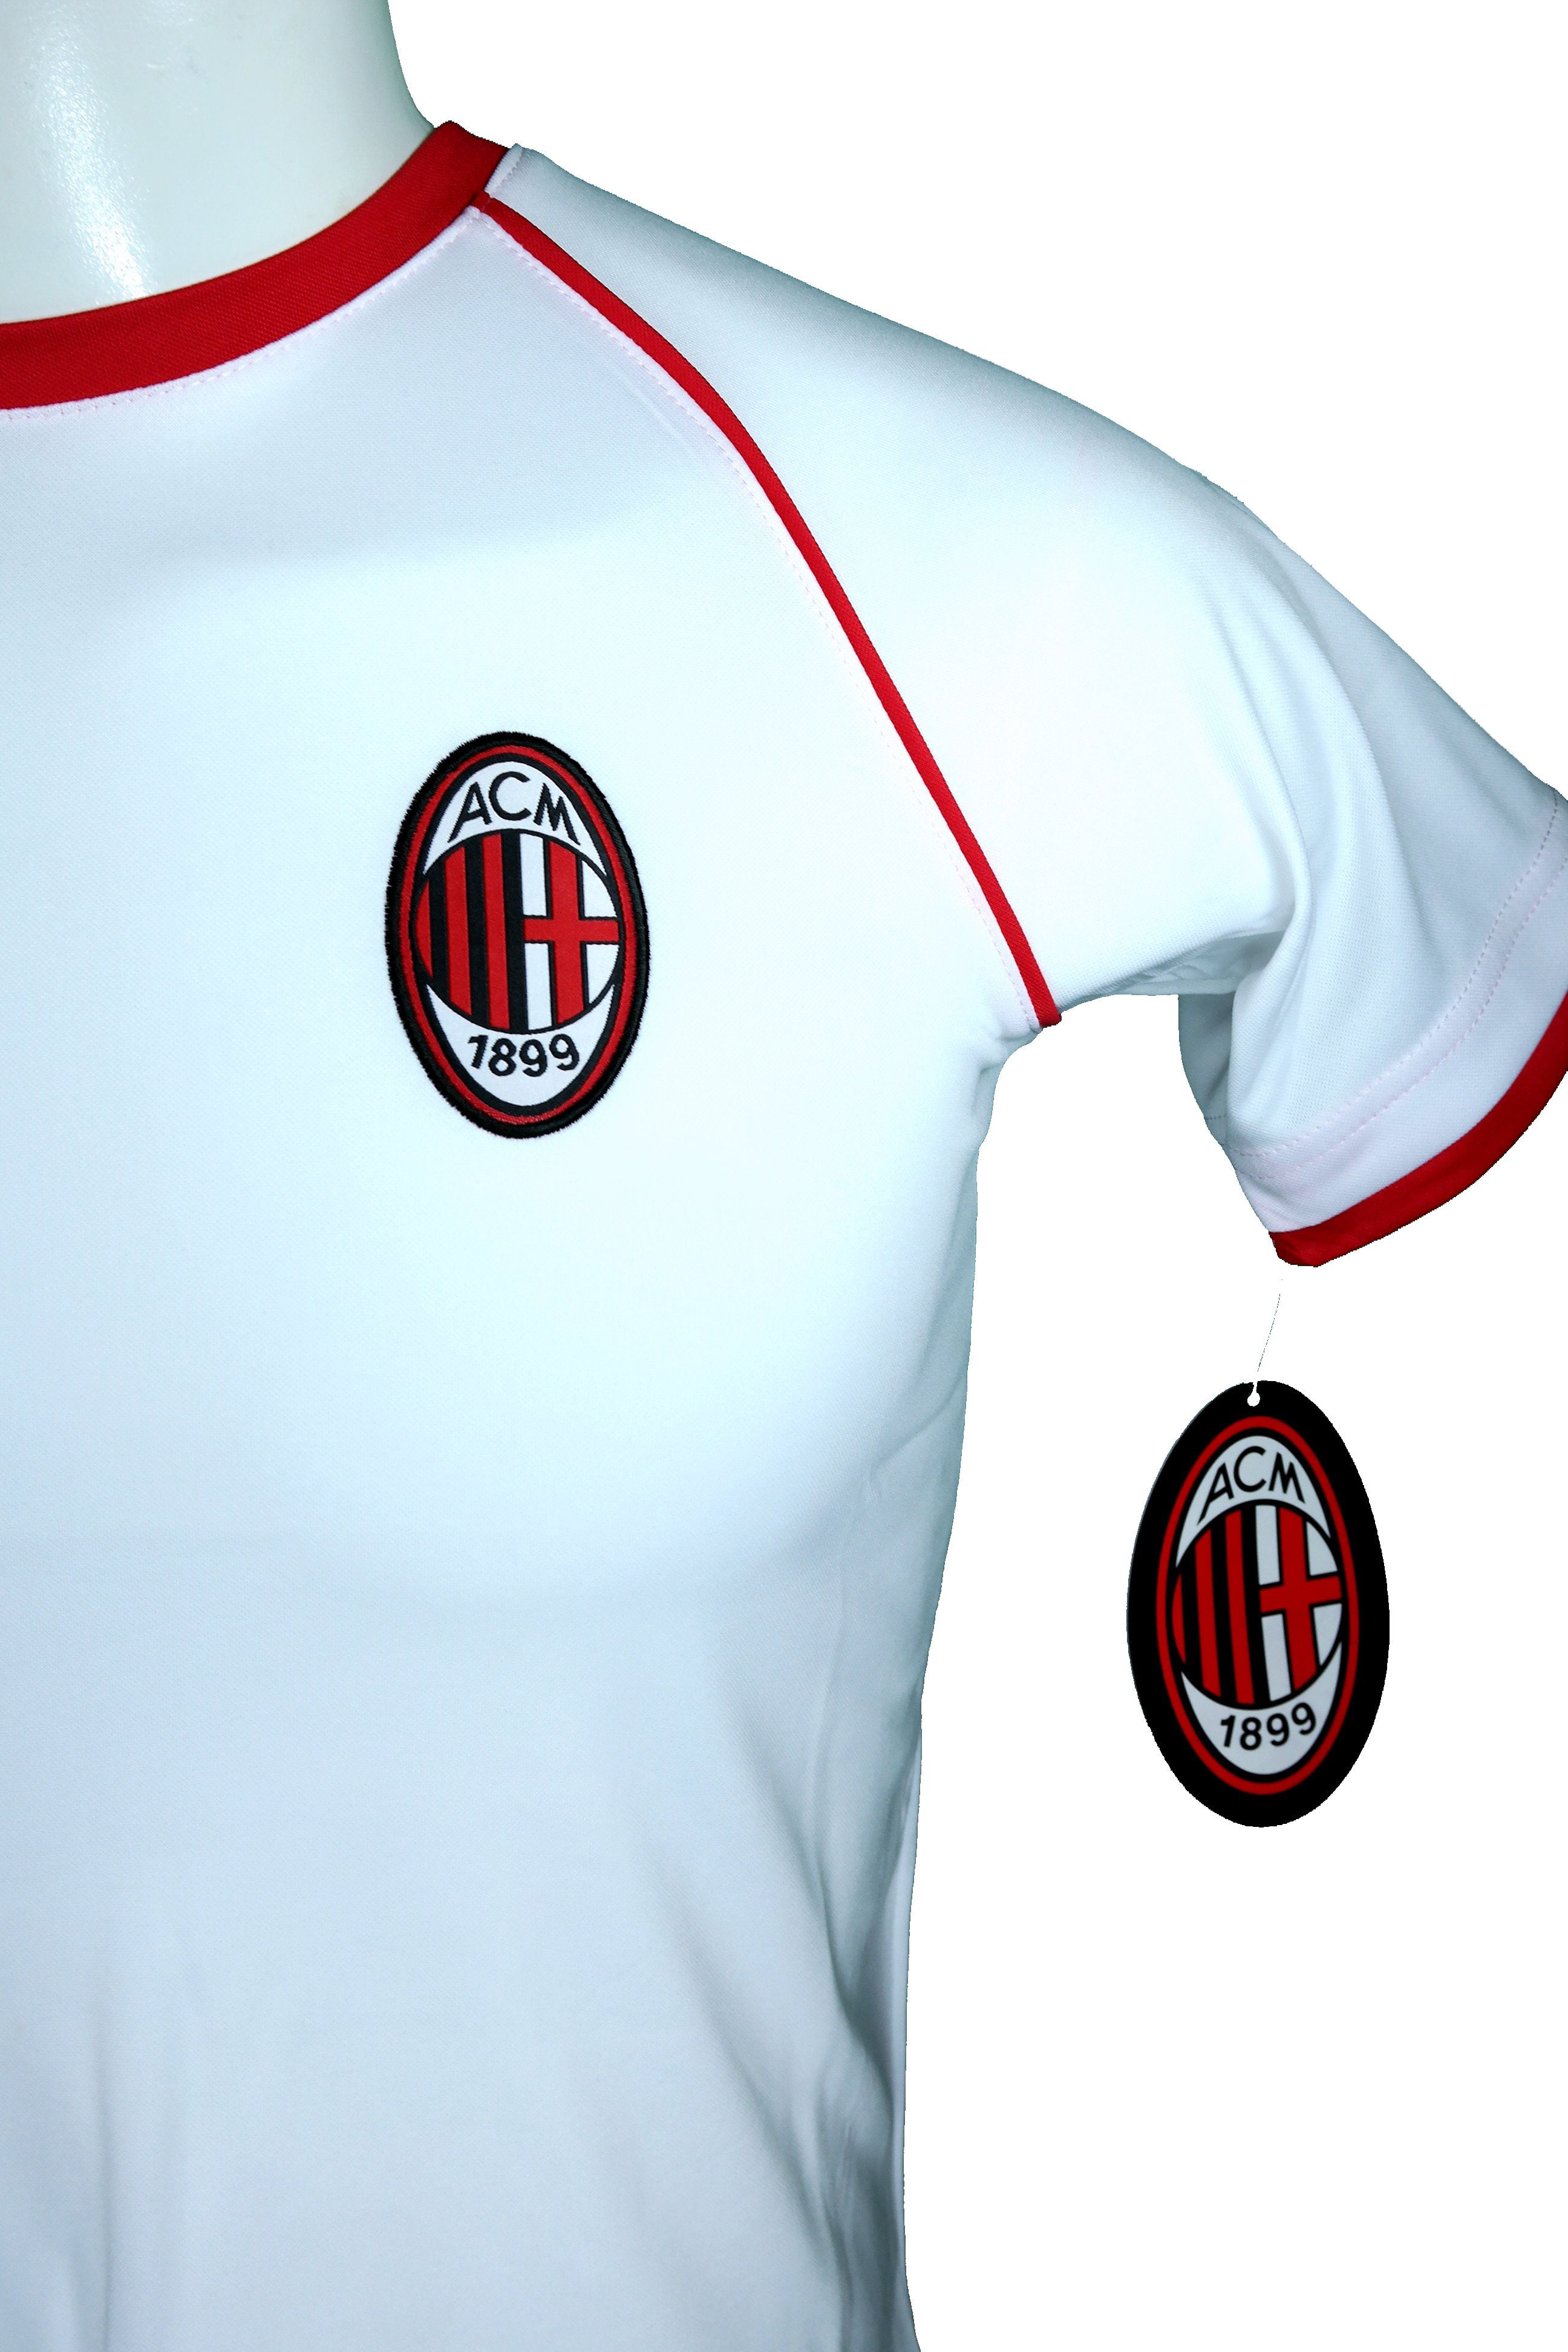 Details about   Ac Millan soccer jersey officially licensed product new training fan by Rhinox 